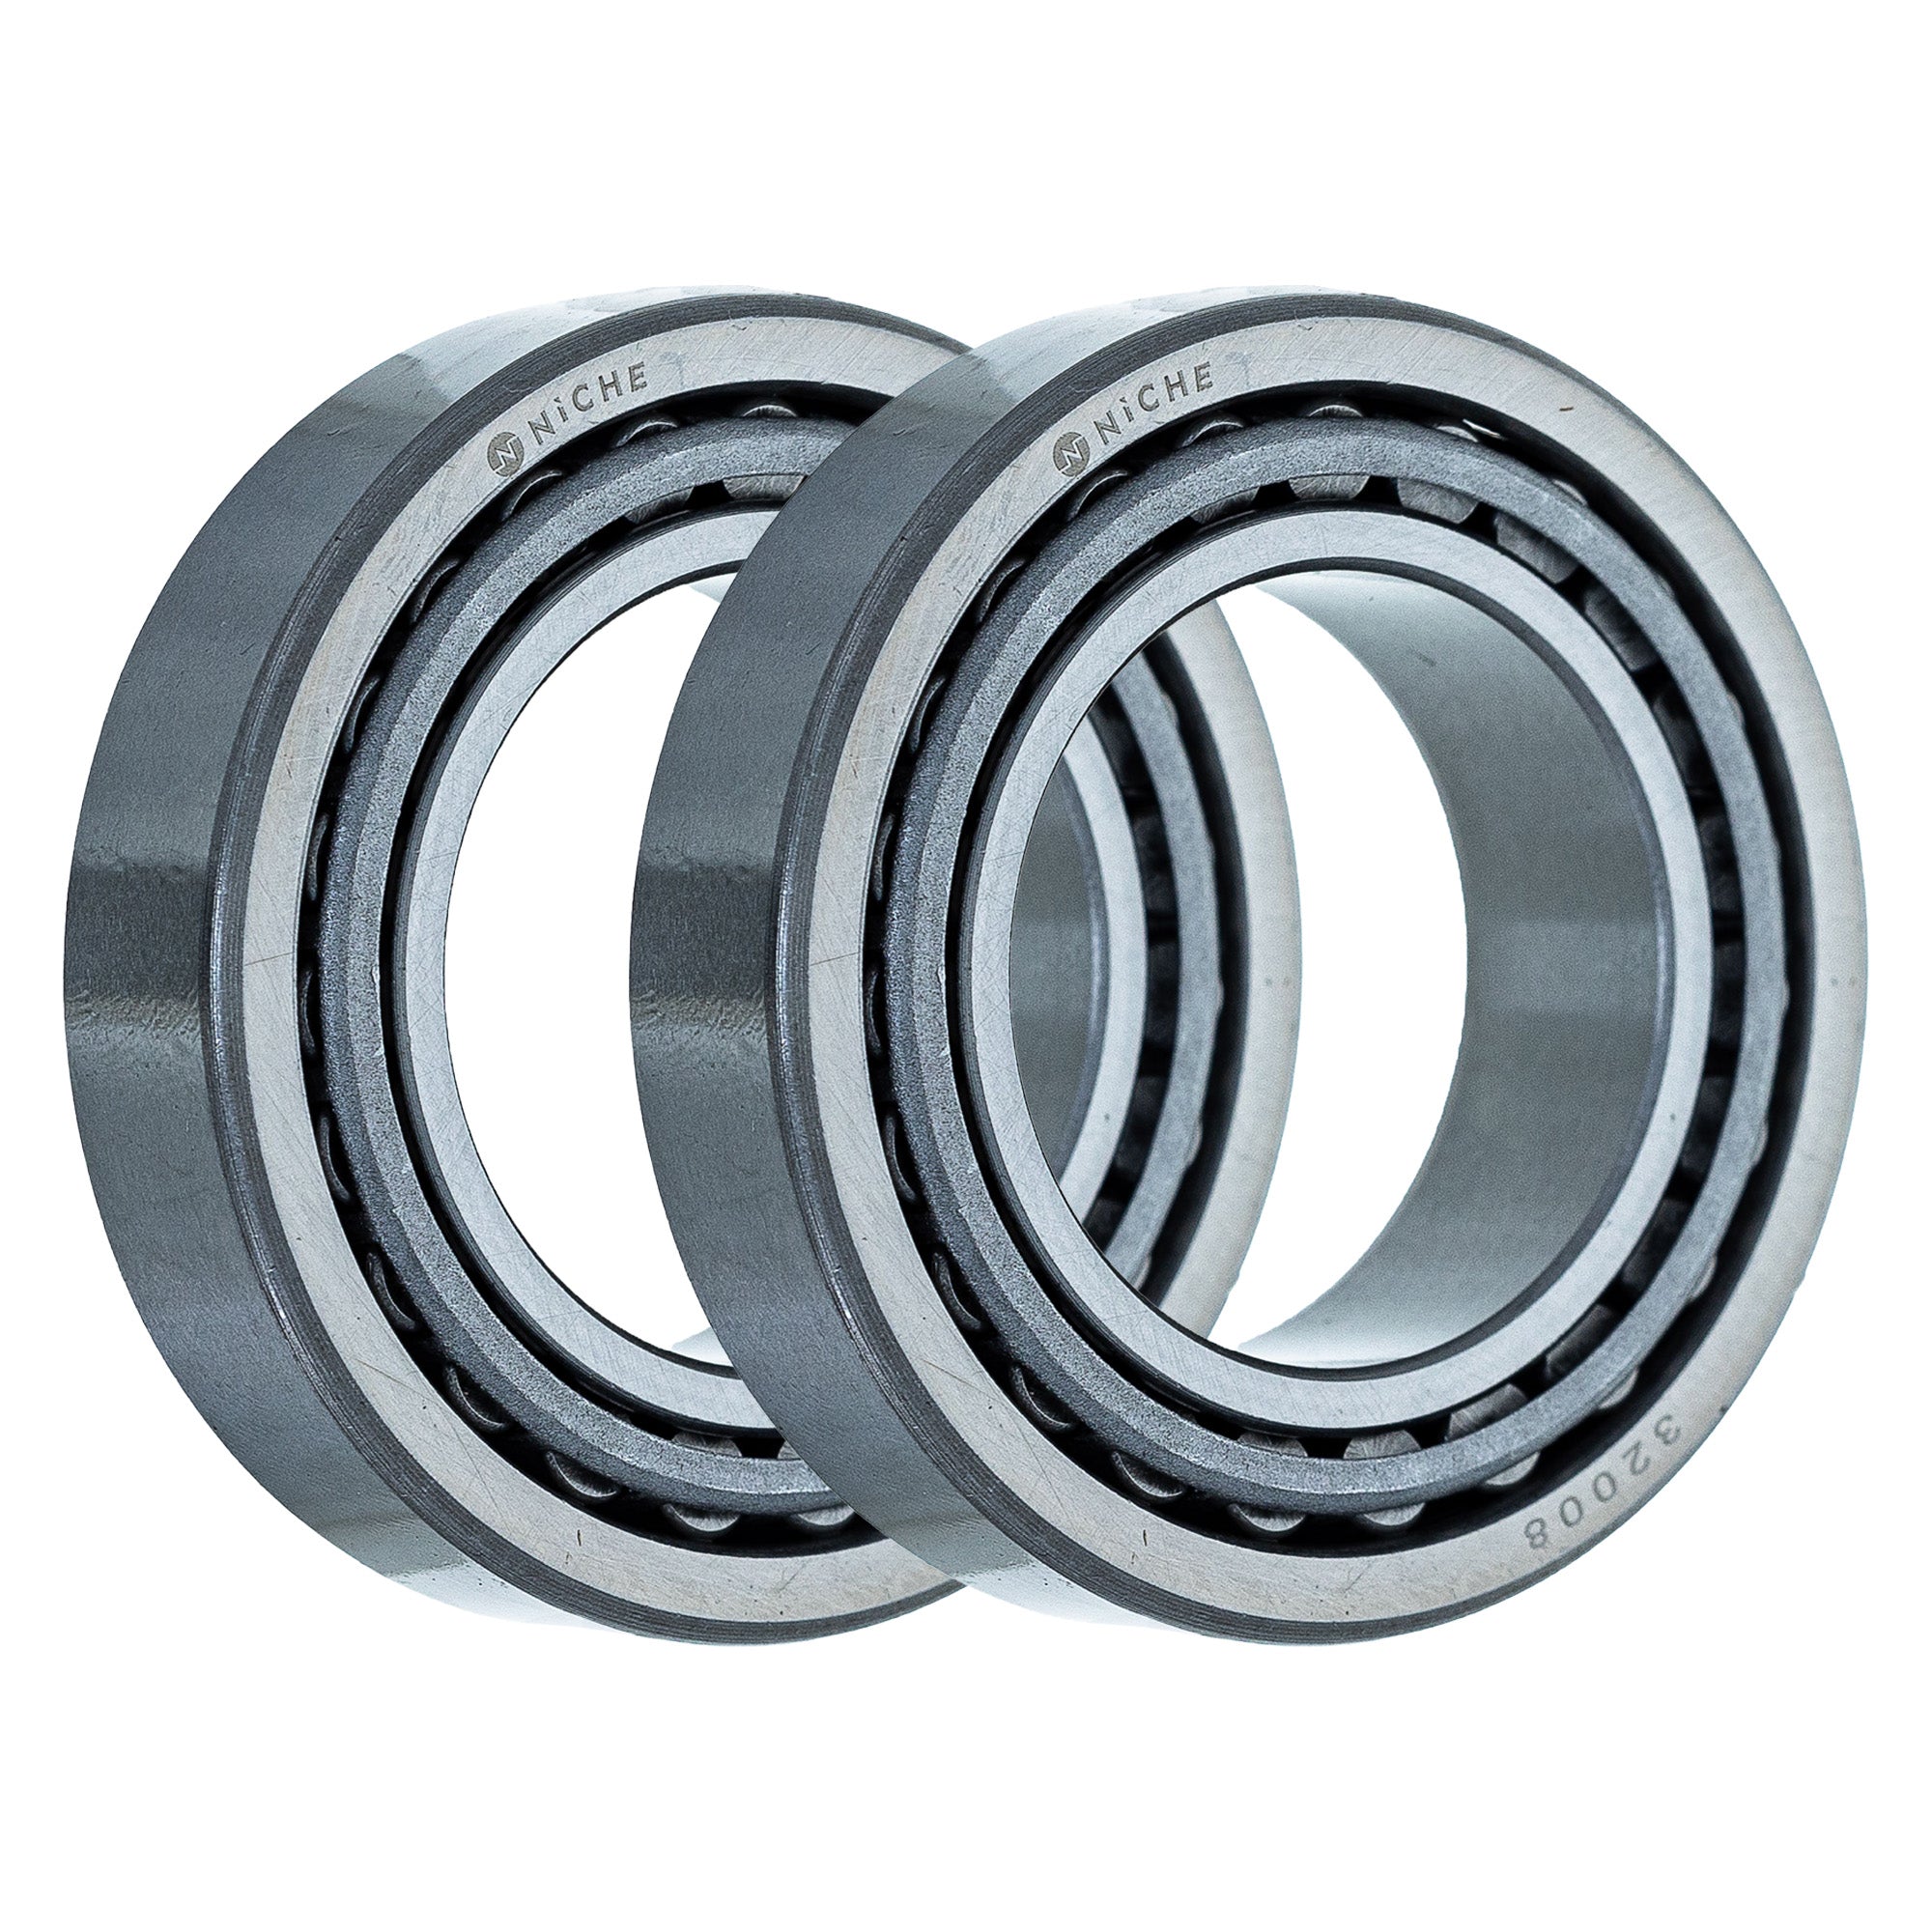 Tapered Roller Bearing Pack of 2 2-Pack for zOTHER Trail Scrambler Predator Outlaw NICHE 519-CBB2296R